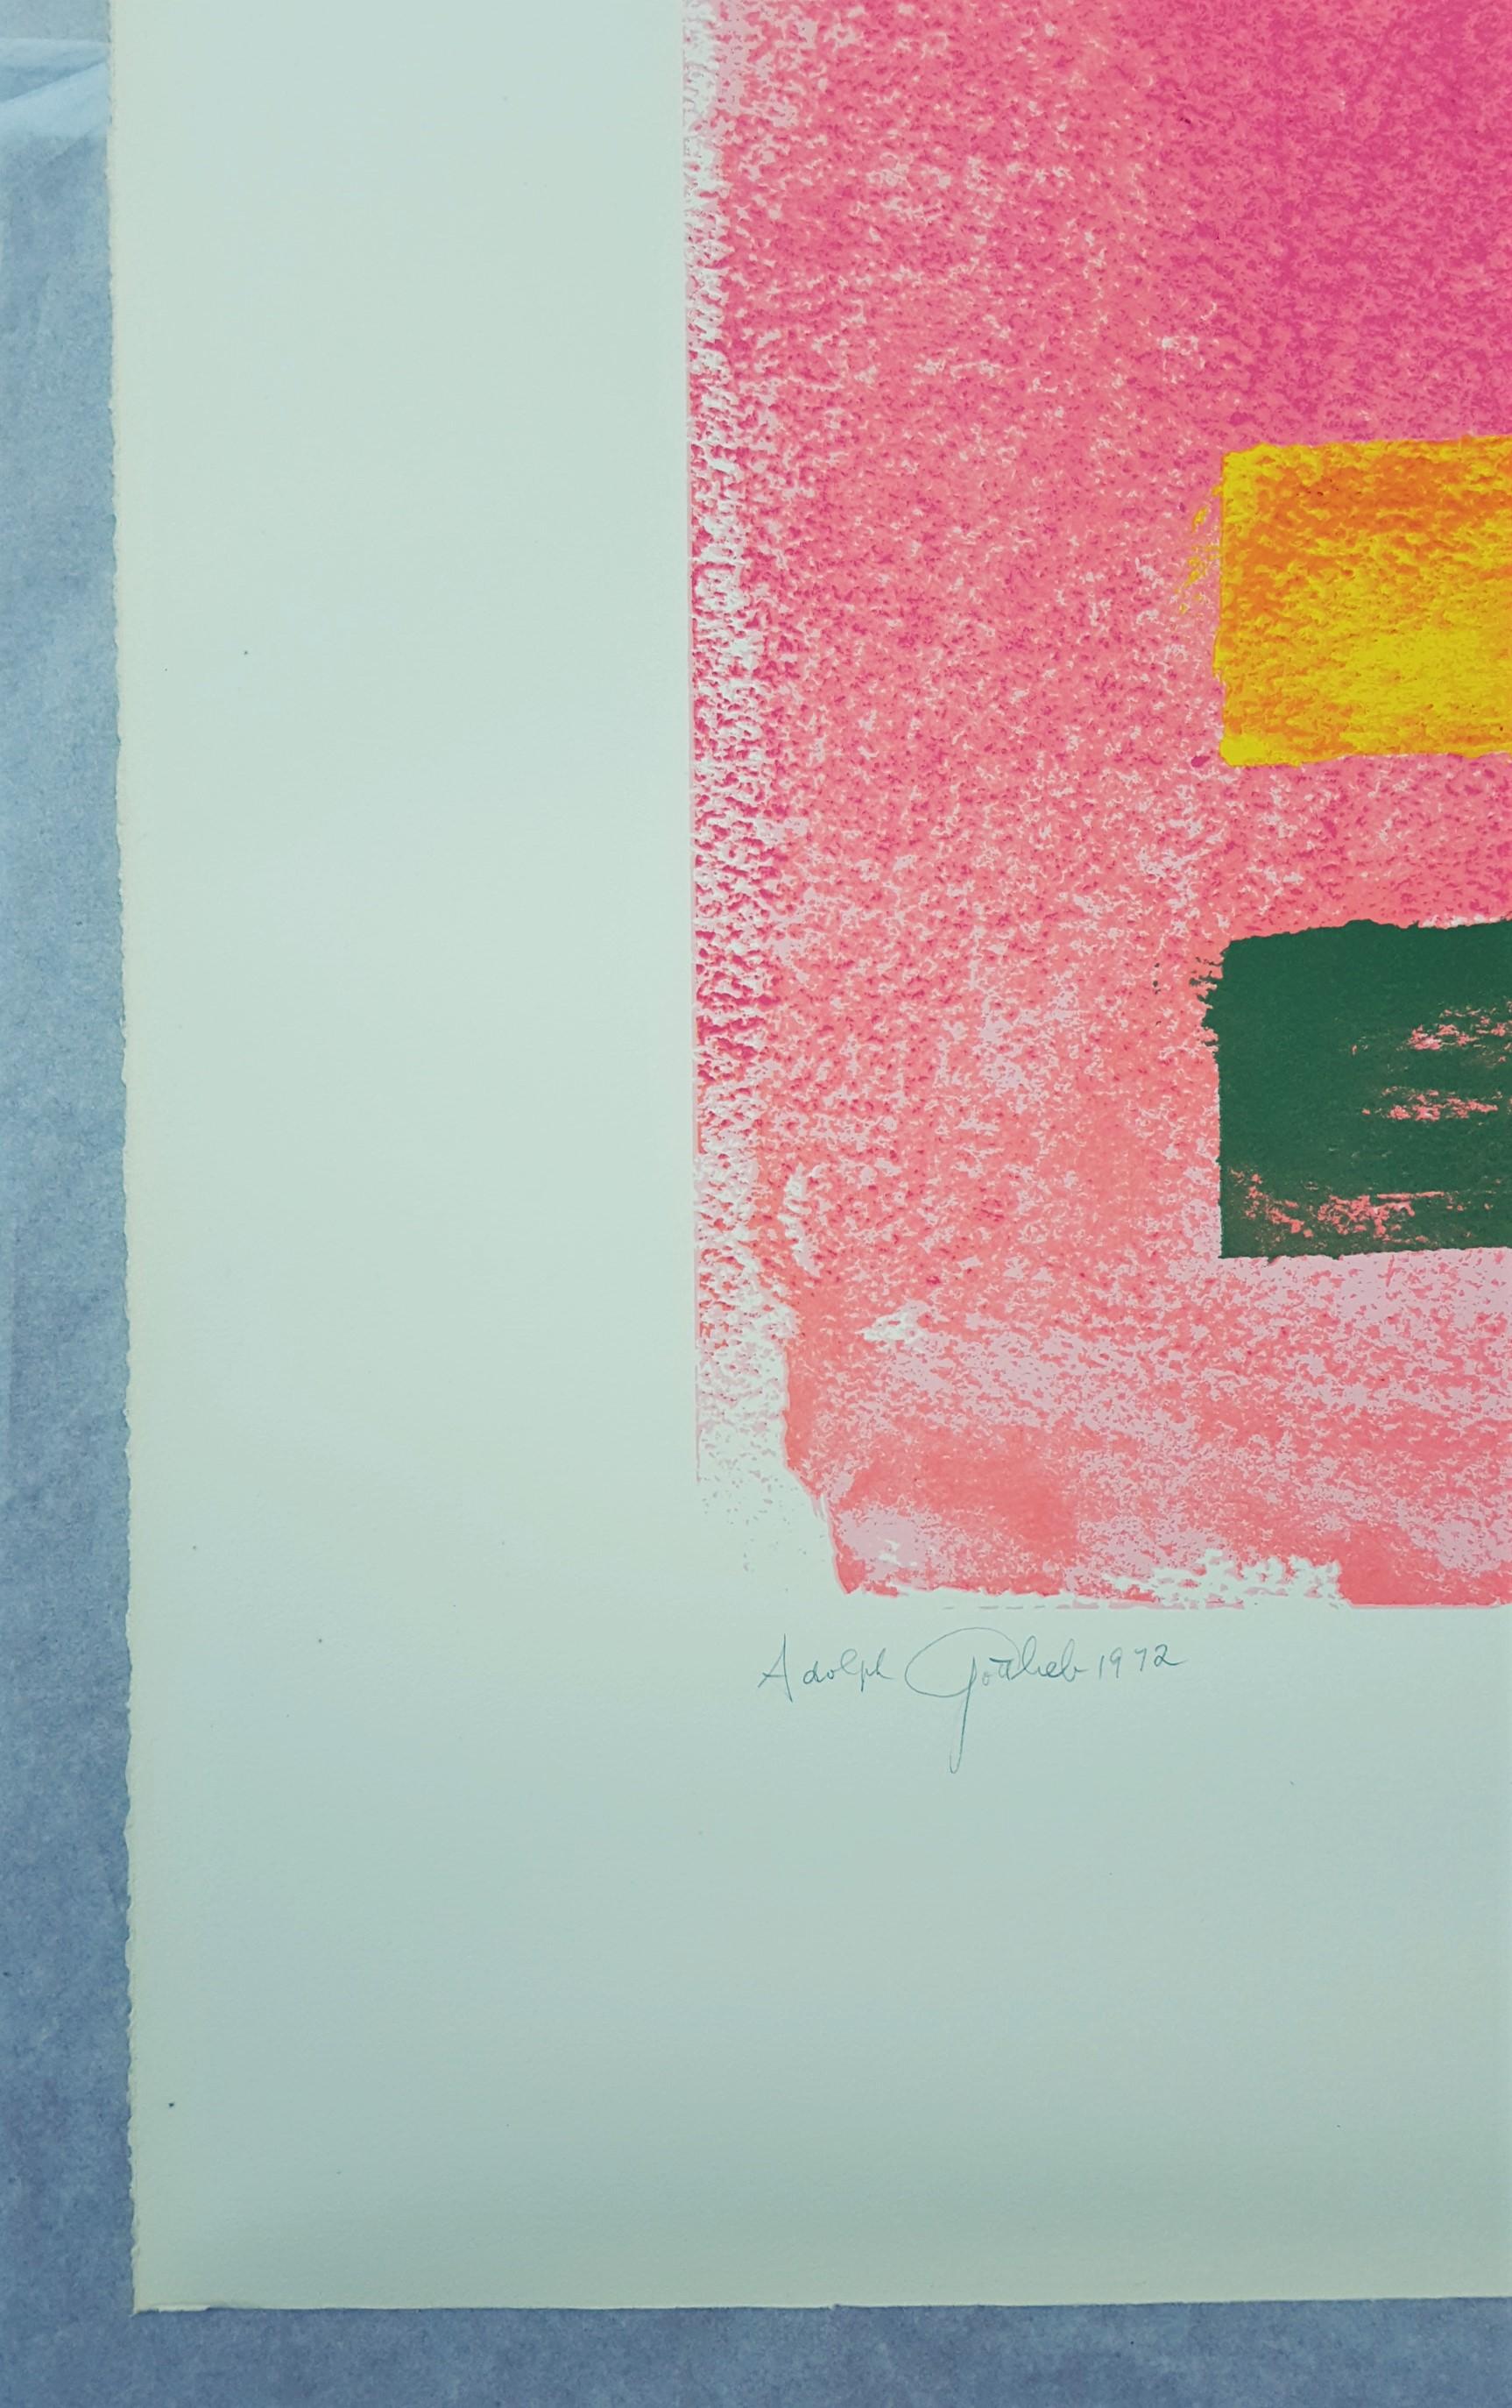 Pink Ground - Abstract Expressionist Print by Adolph Gottlieb